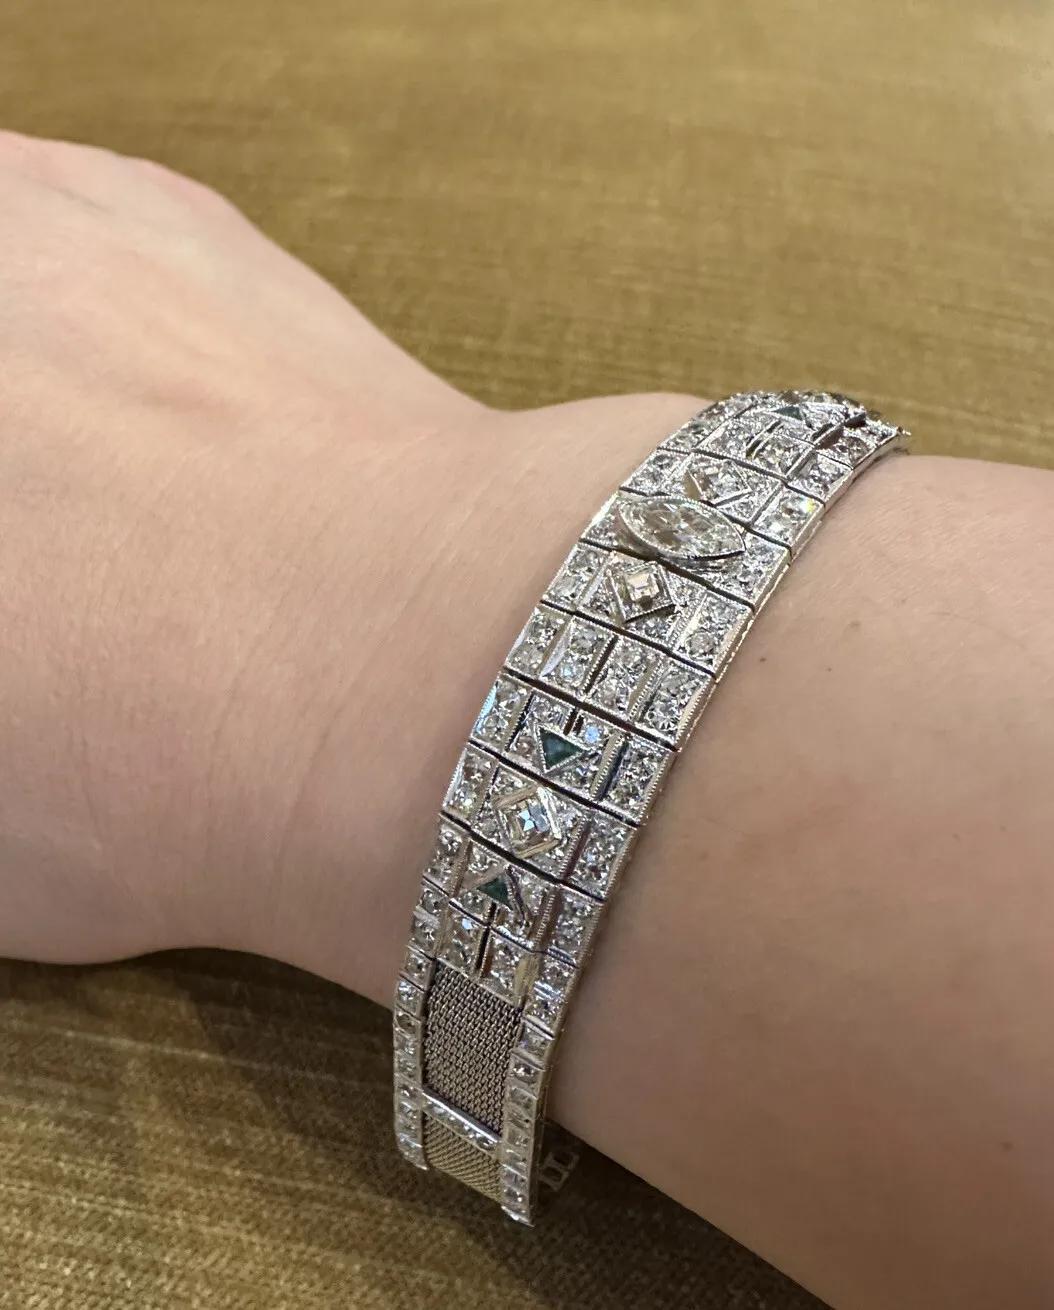 Platinum Art Deco Diamond Bracelet with Marquise Center 

Platinum Art Deco Diamond Bracelet features One Marquise Diamond and Two Square Cut Diamonds in center accented by 190 Old Cut Round and Single Cut Diamonds as well as Ten Square and Trillion